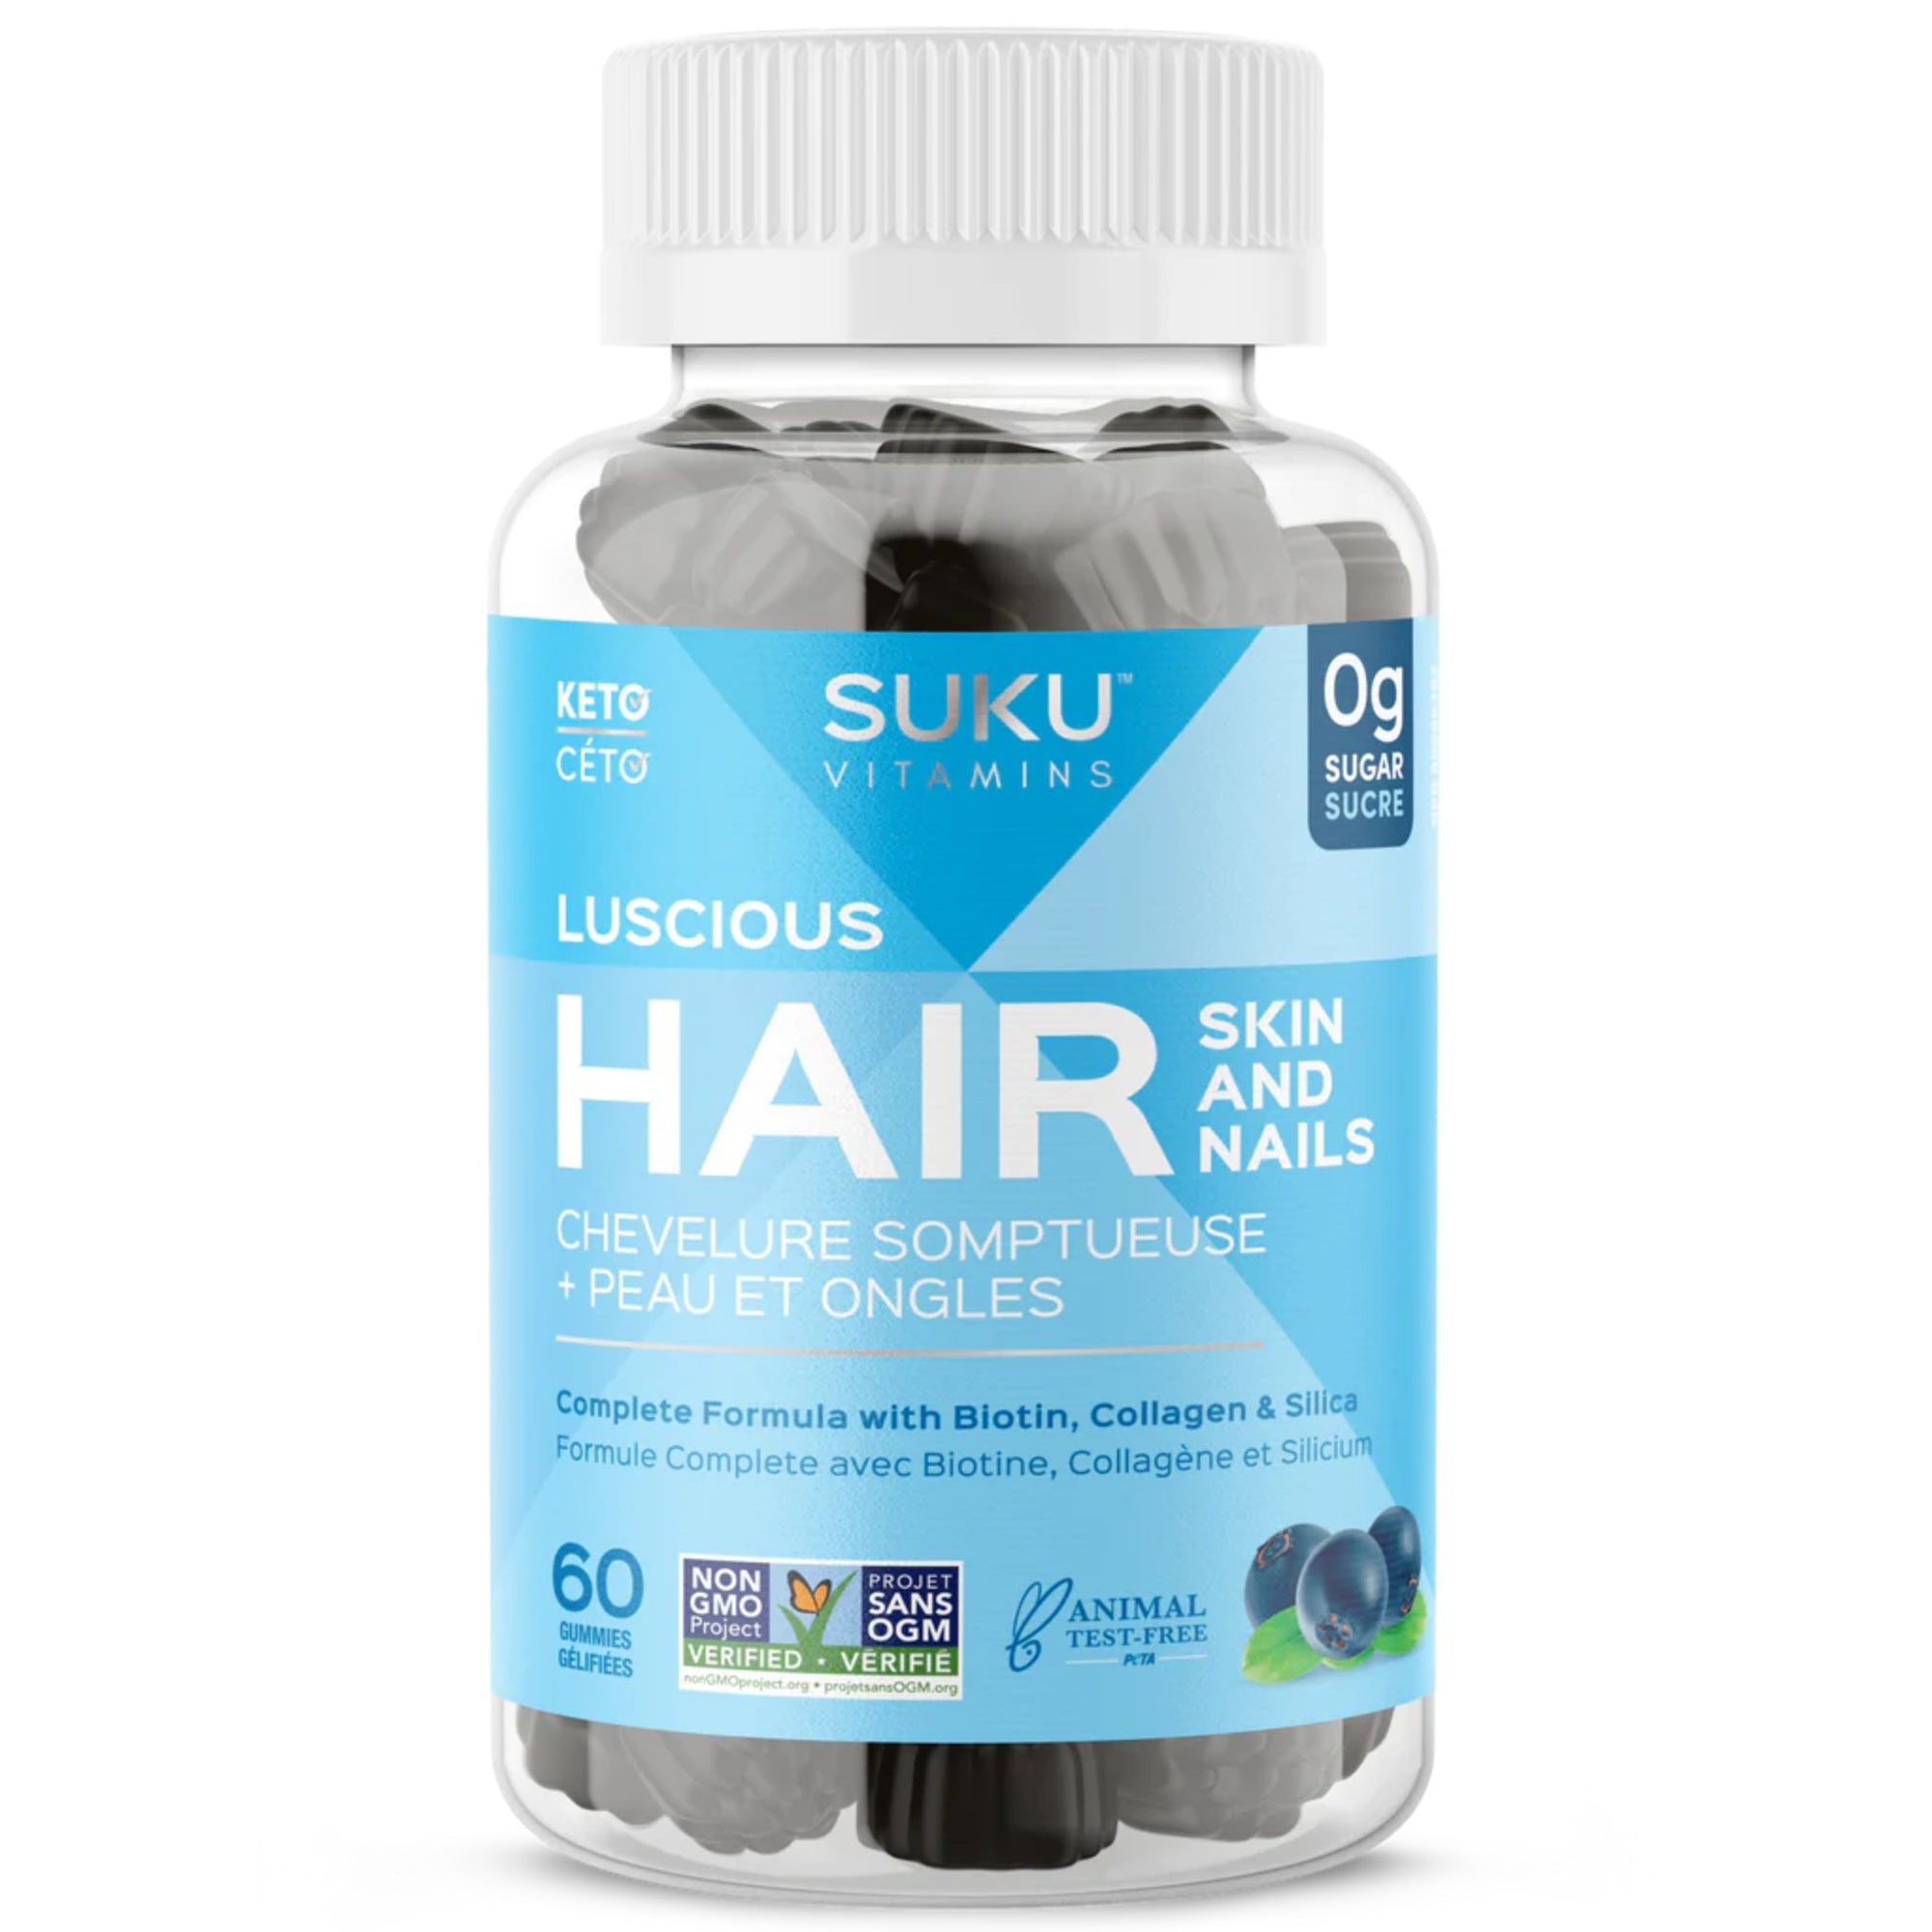 Suku Luscious Hair Gummies 60s per bottle - natural gummy supplement to support skin and nails. 